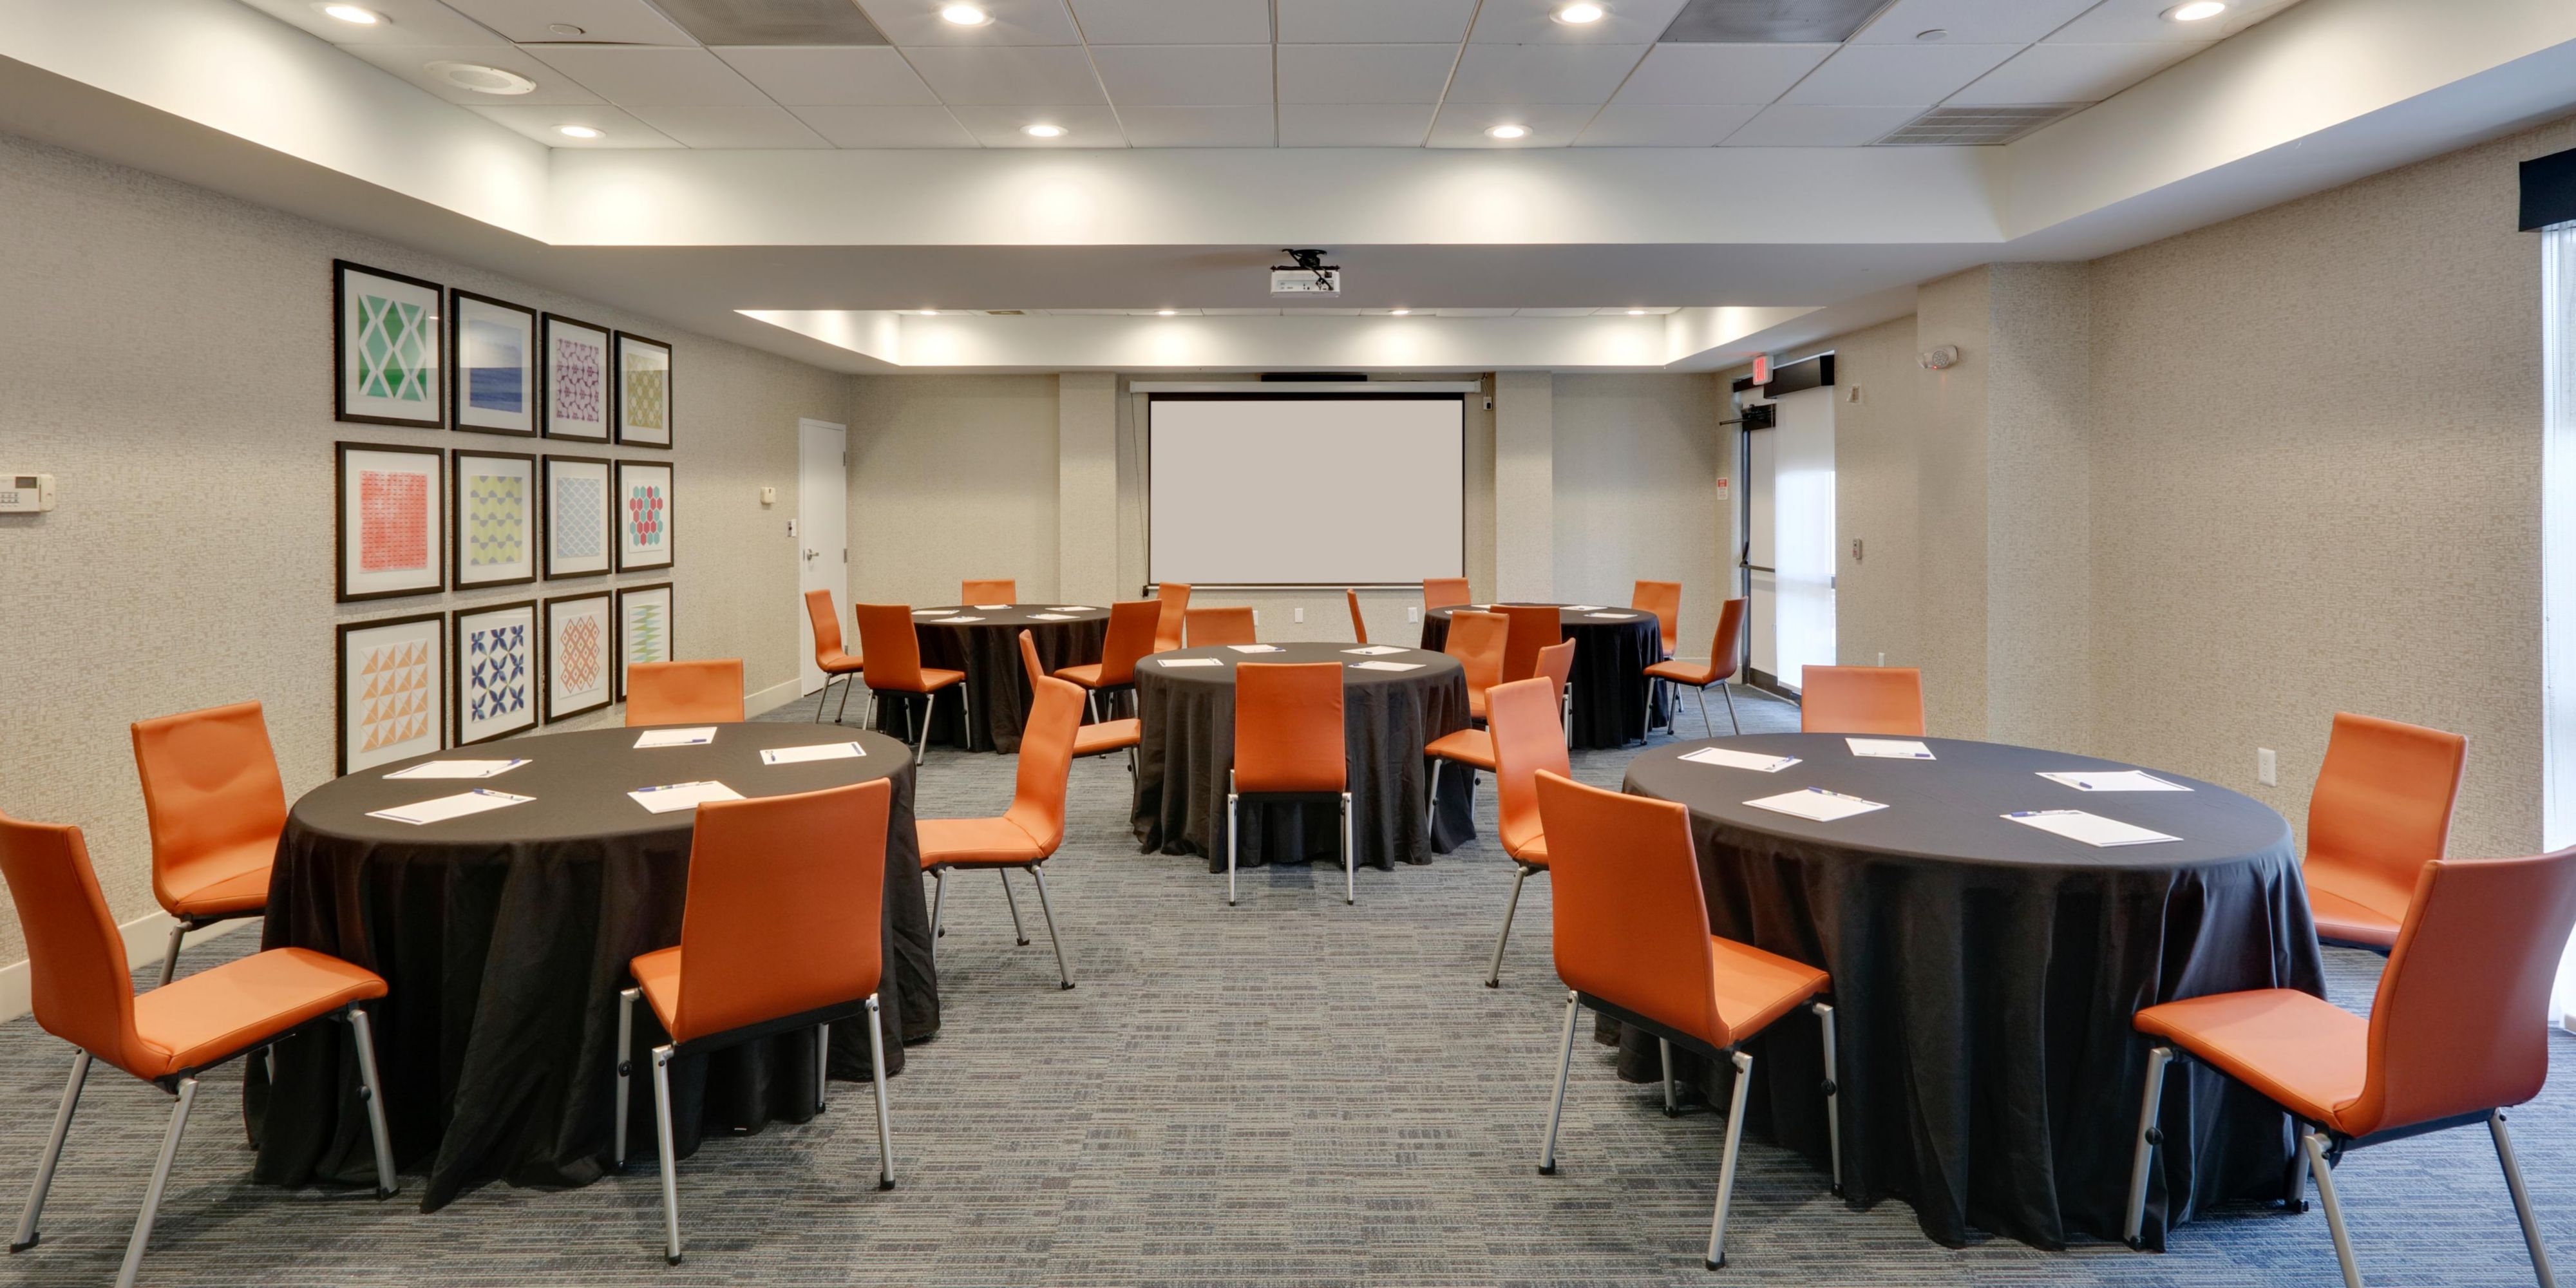 Small meetings play a vital role in the success of many organizations.  Are you planning a small corporate meeting, board retreat or brainstorming session?  Our flexible meeting space is sure to lead to big ideas!  Whether you're a group of 15 or 40, we can help!  Our Director of Sales is dedicated to making your meeting a huge success!  